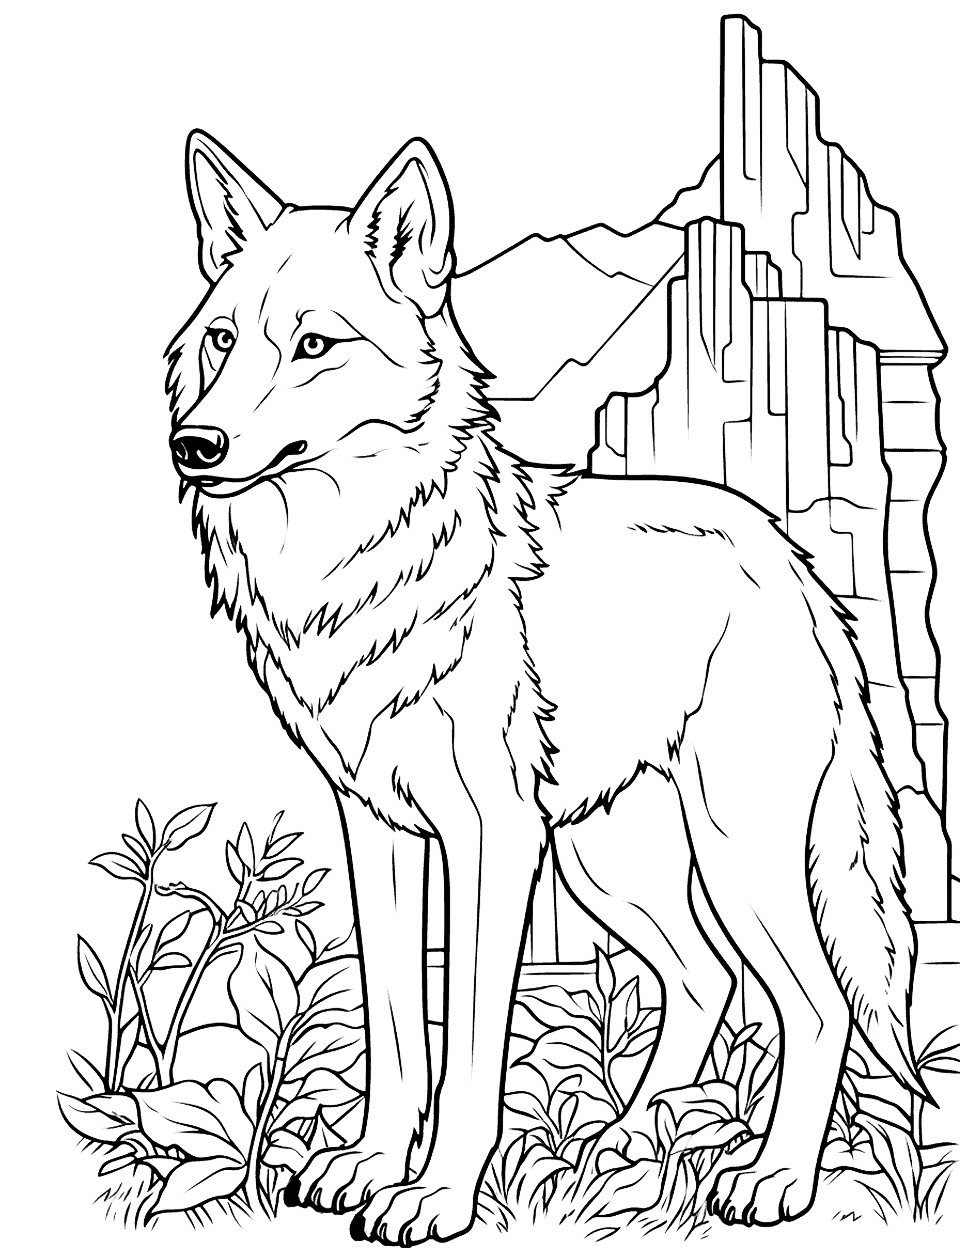 Wolf and the Lost City Coloring Page - A wolf discovering ancient ruins overgrown with vines and moss.